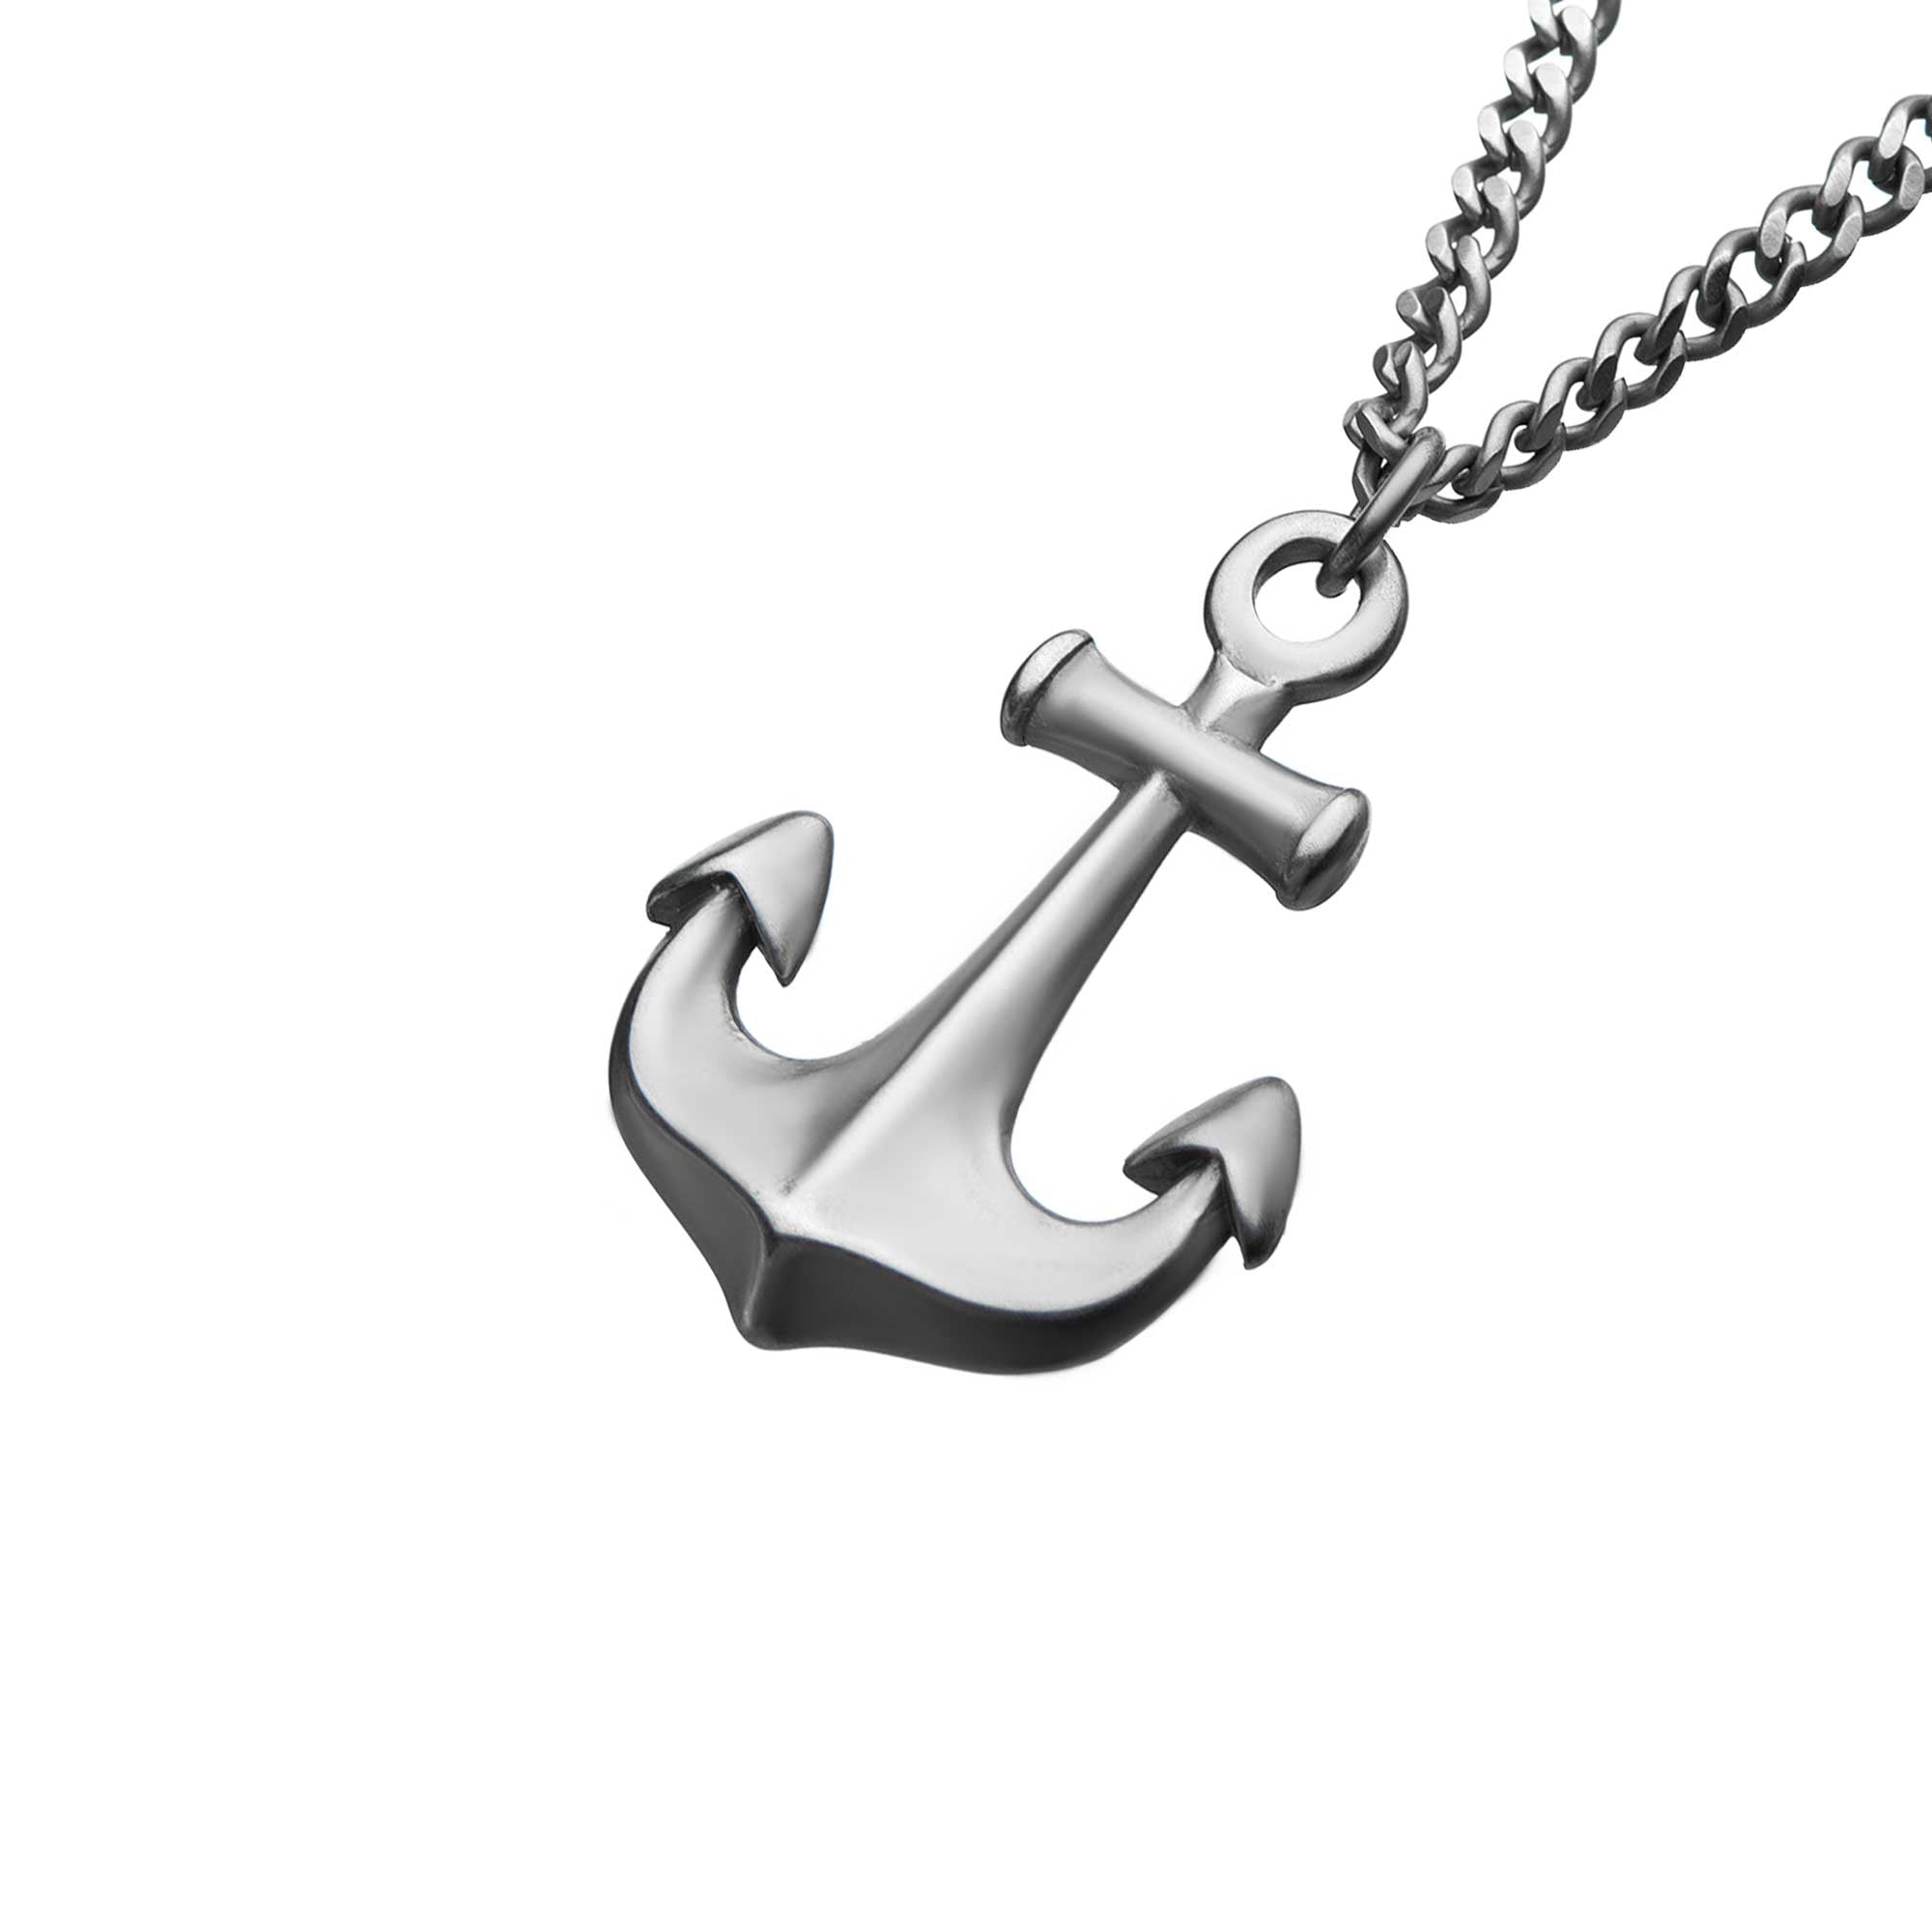 Stainless Steel Antiqued Finish Nautical Anchor Pendant